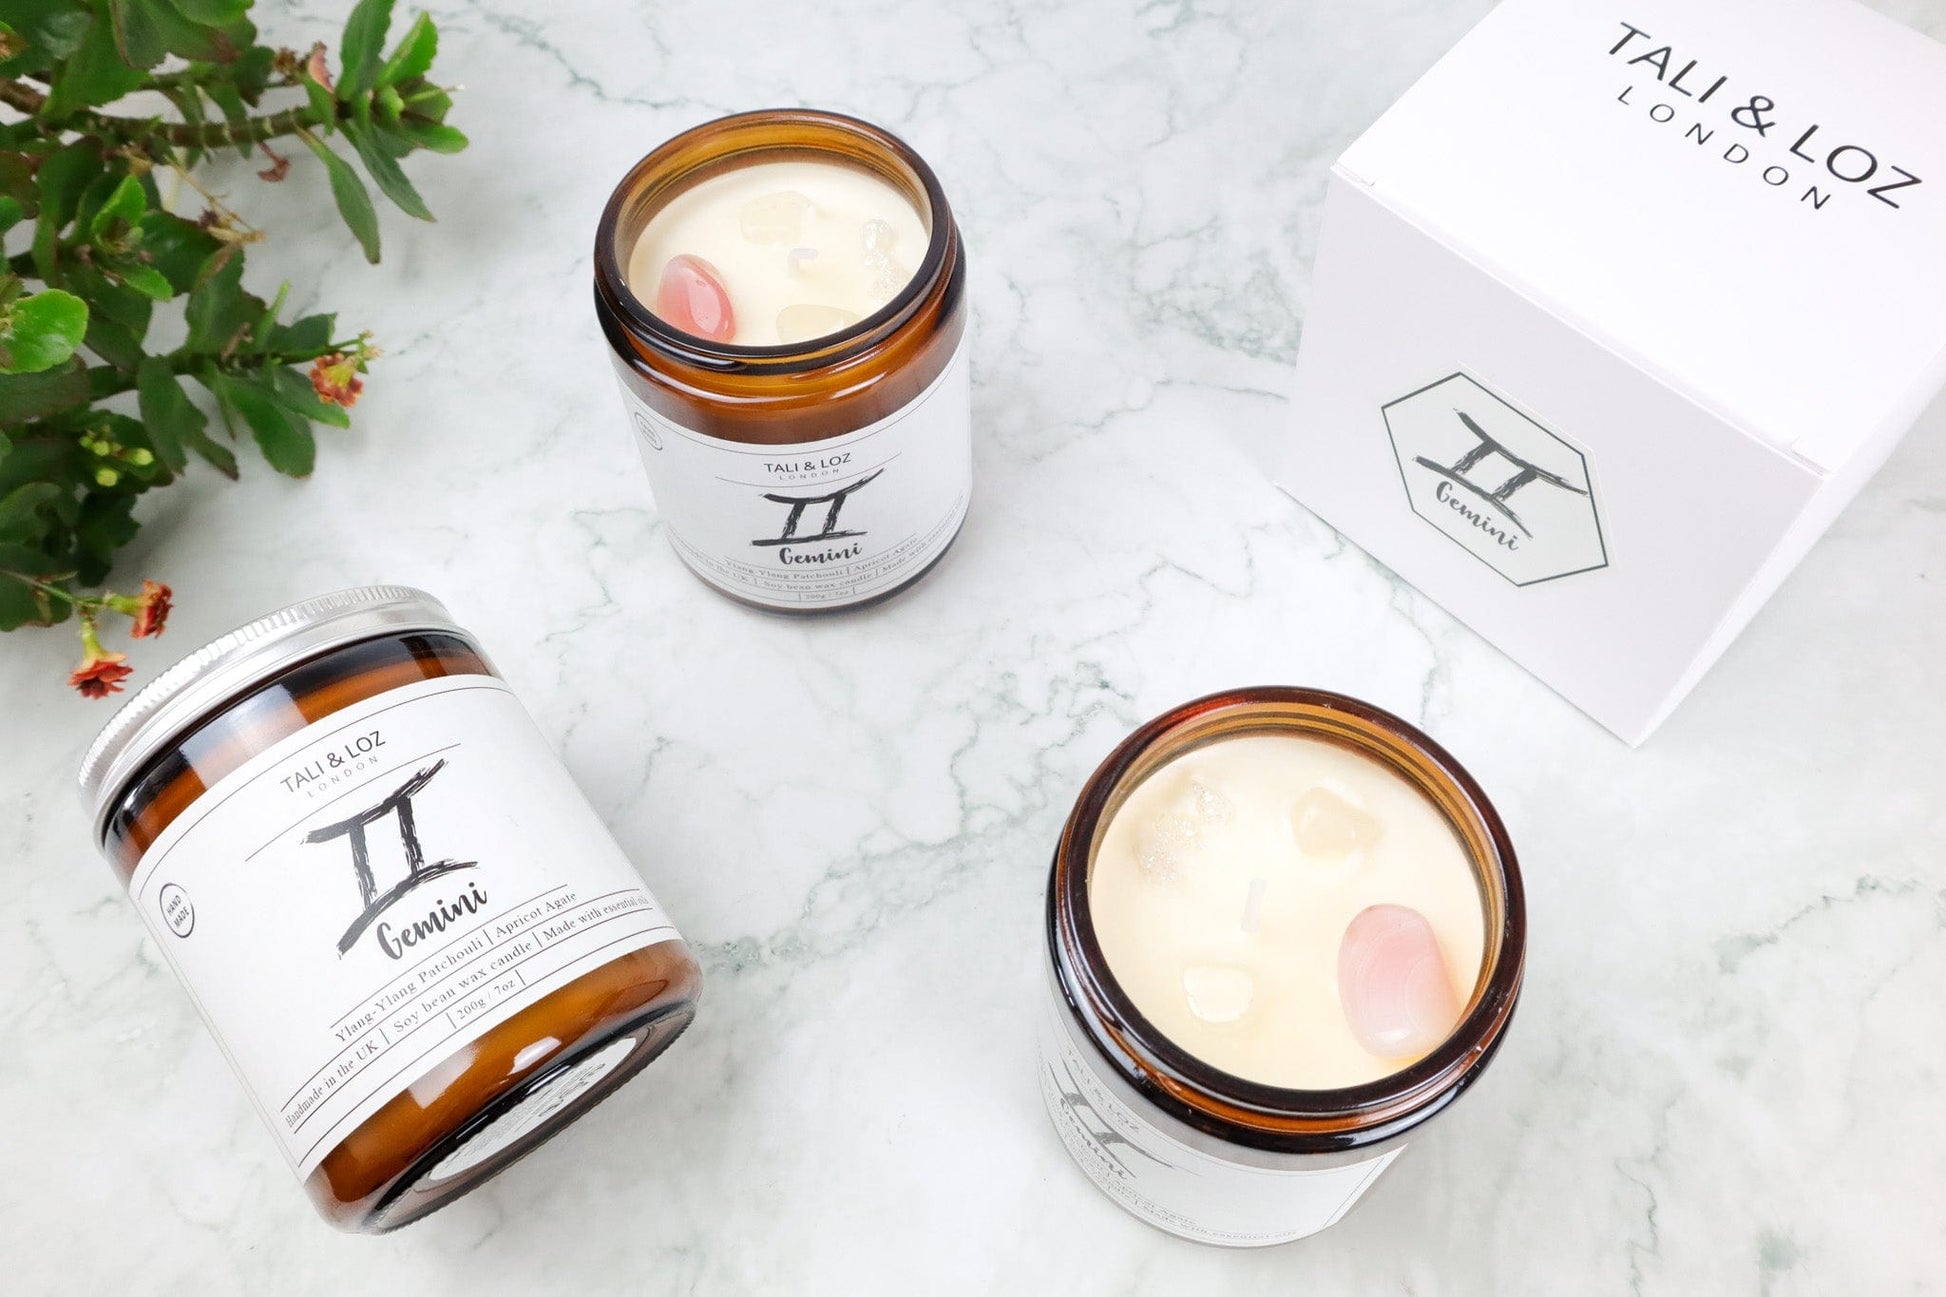 Gemini Candle with Apricot Agate Candles Tali & Loz